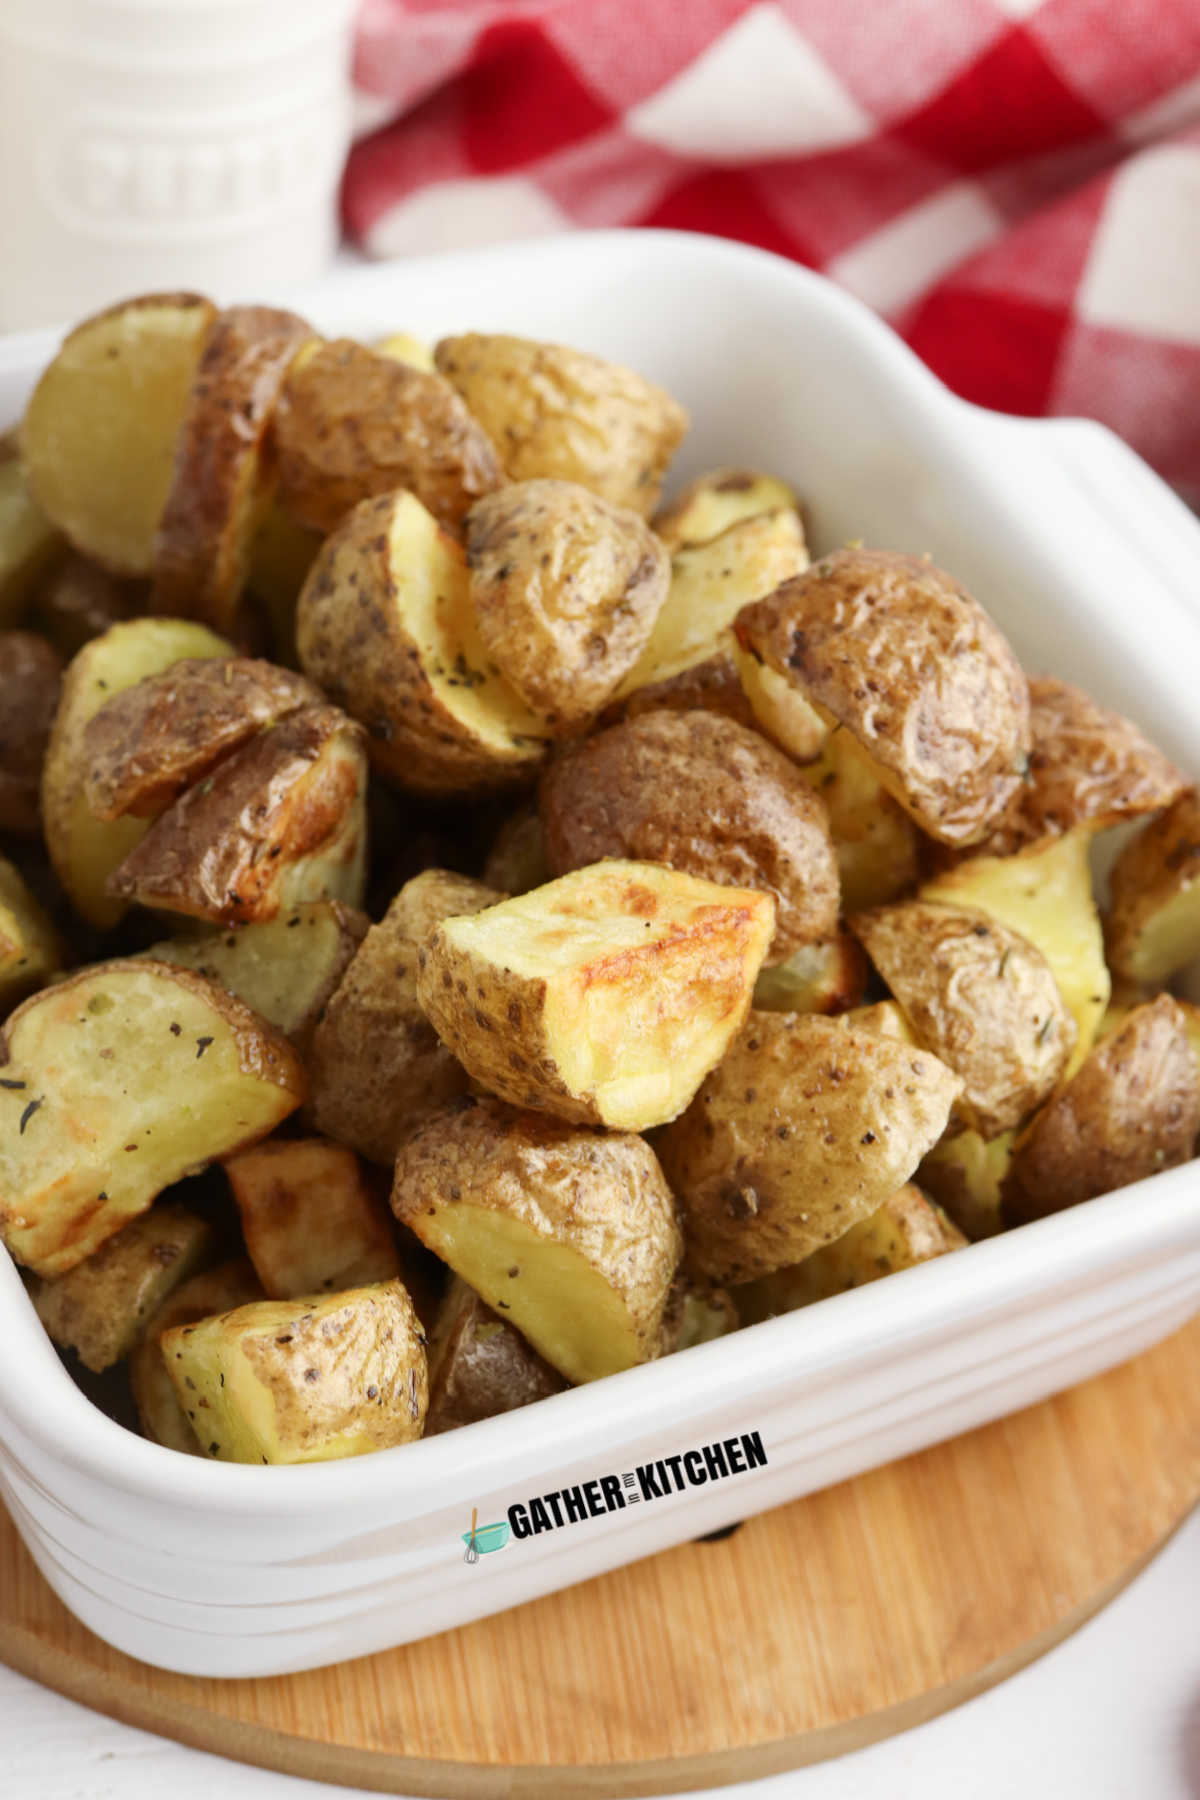 Roasted potatoes in a white dish.